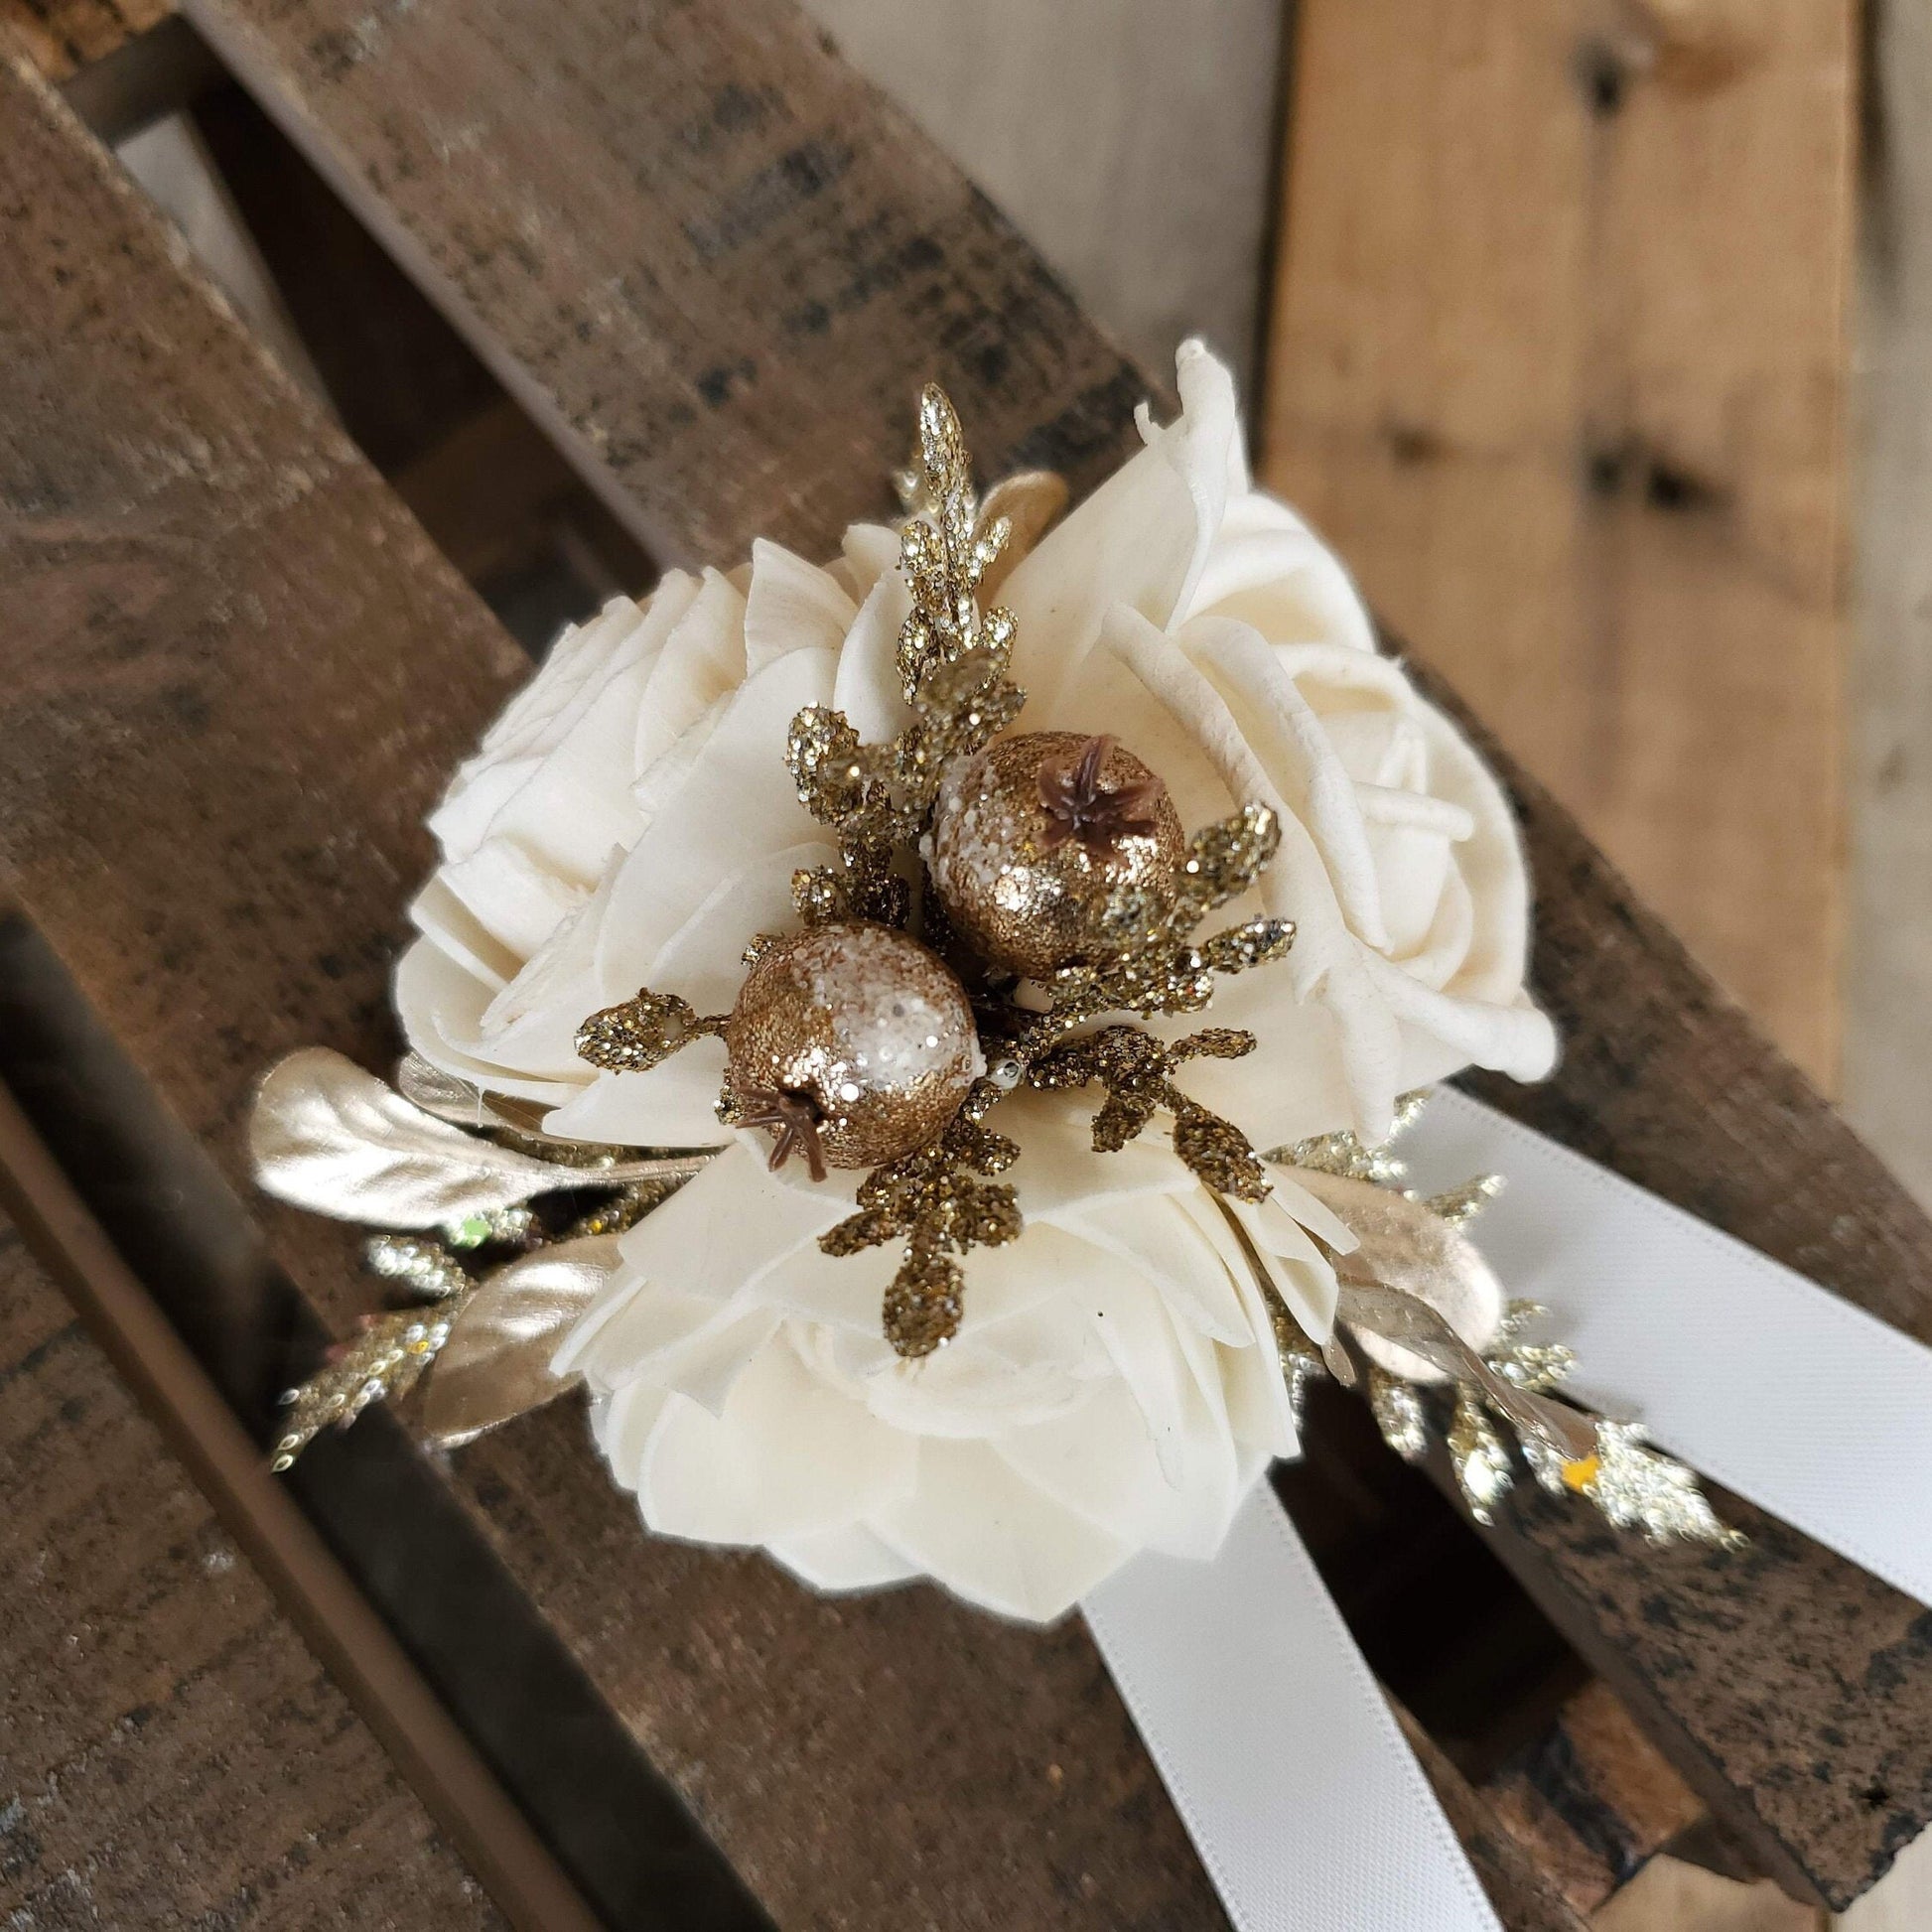 Gold Glitter Wrist or Pinned Corsage made with Sola Wood Flowers, Color Options Available